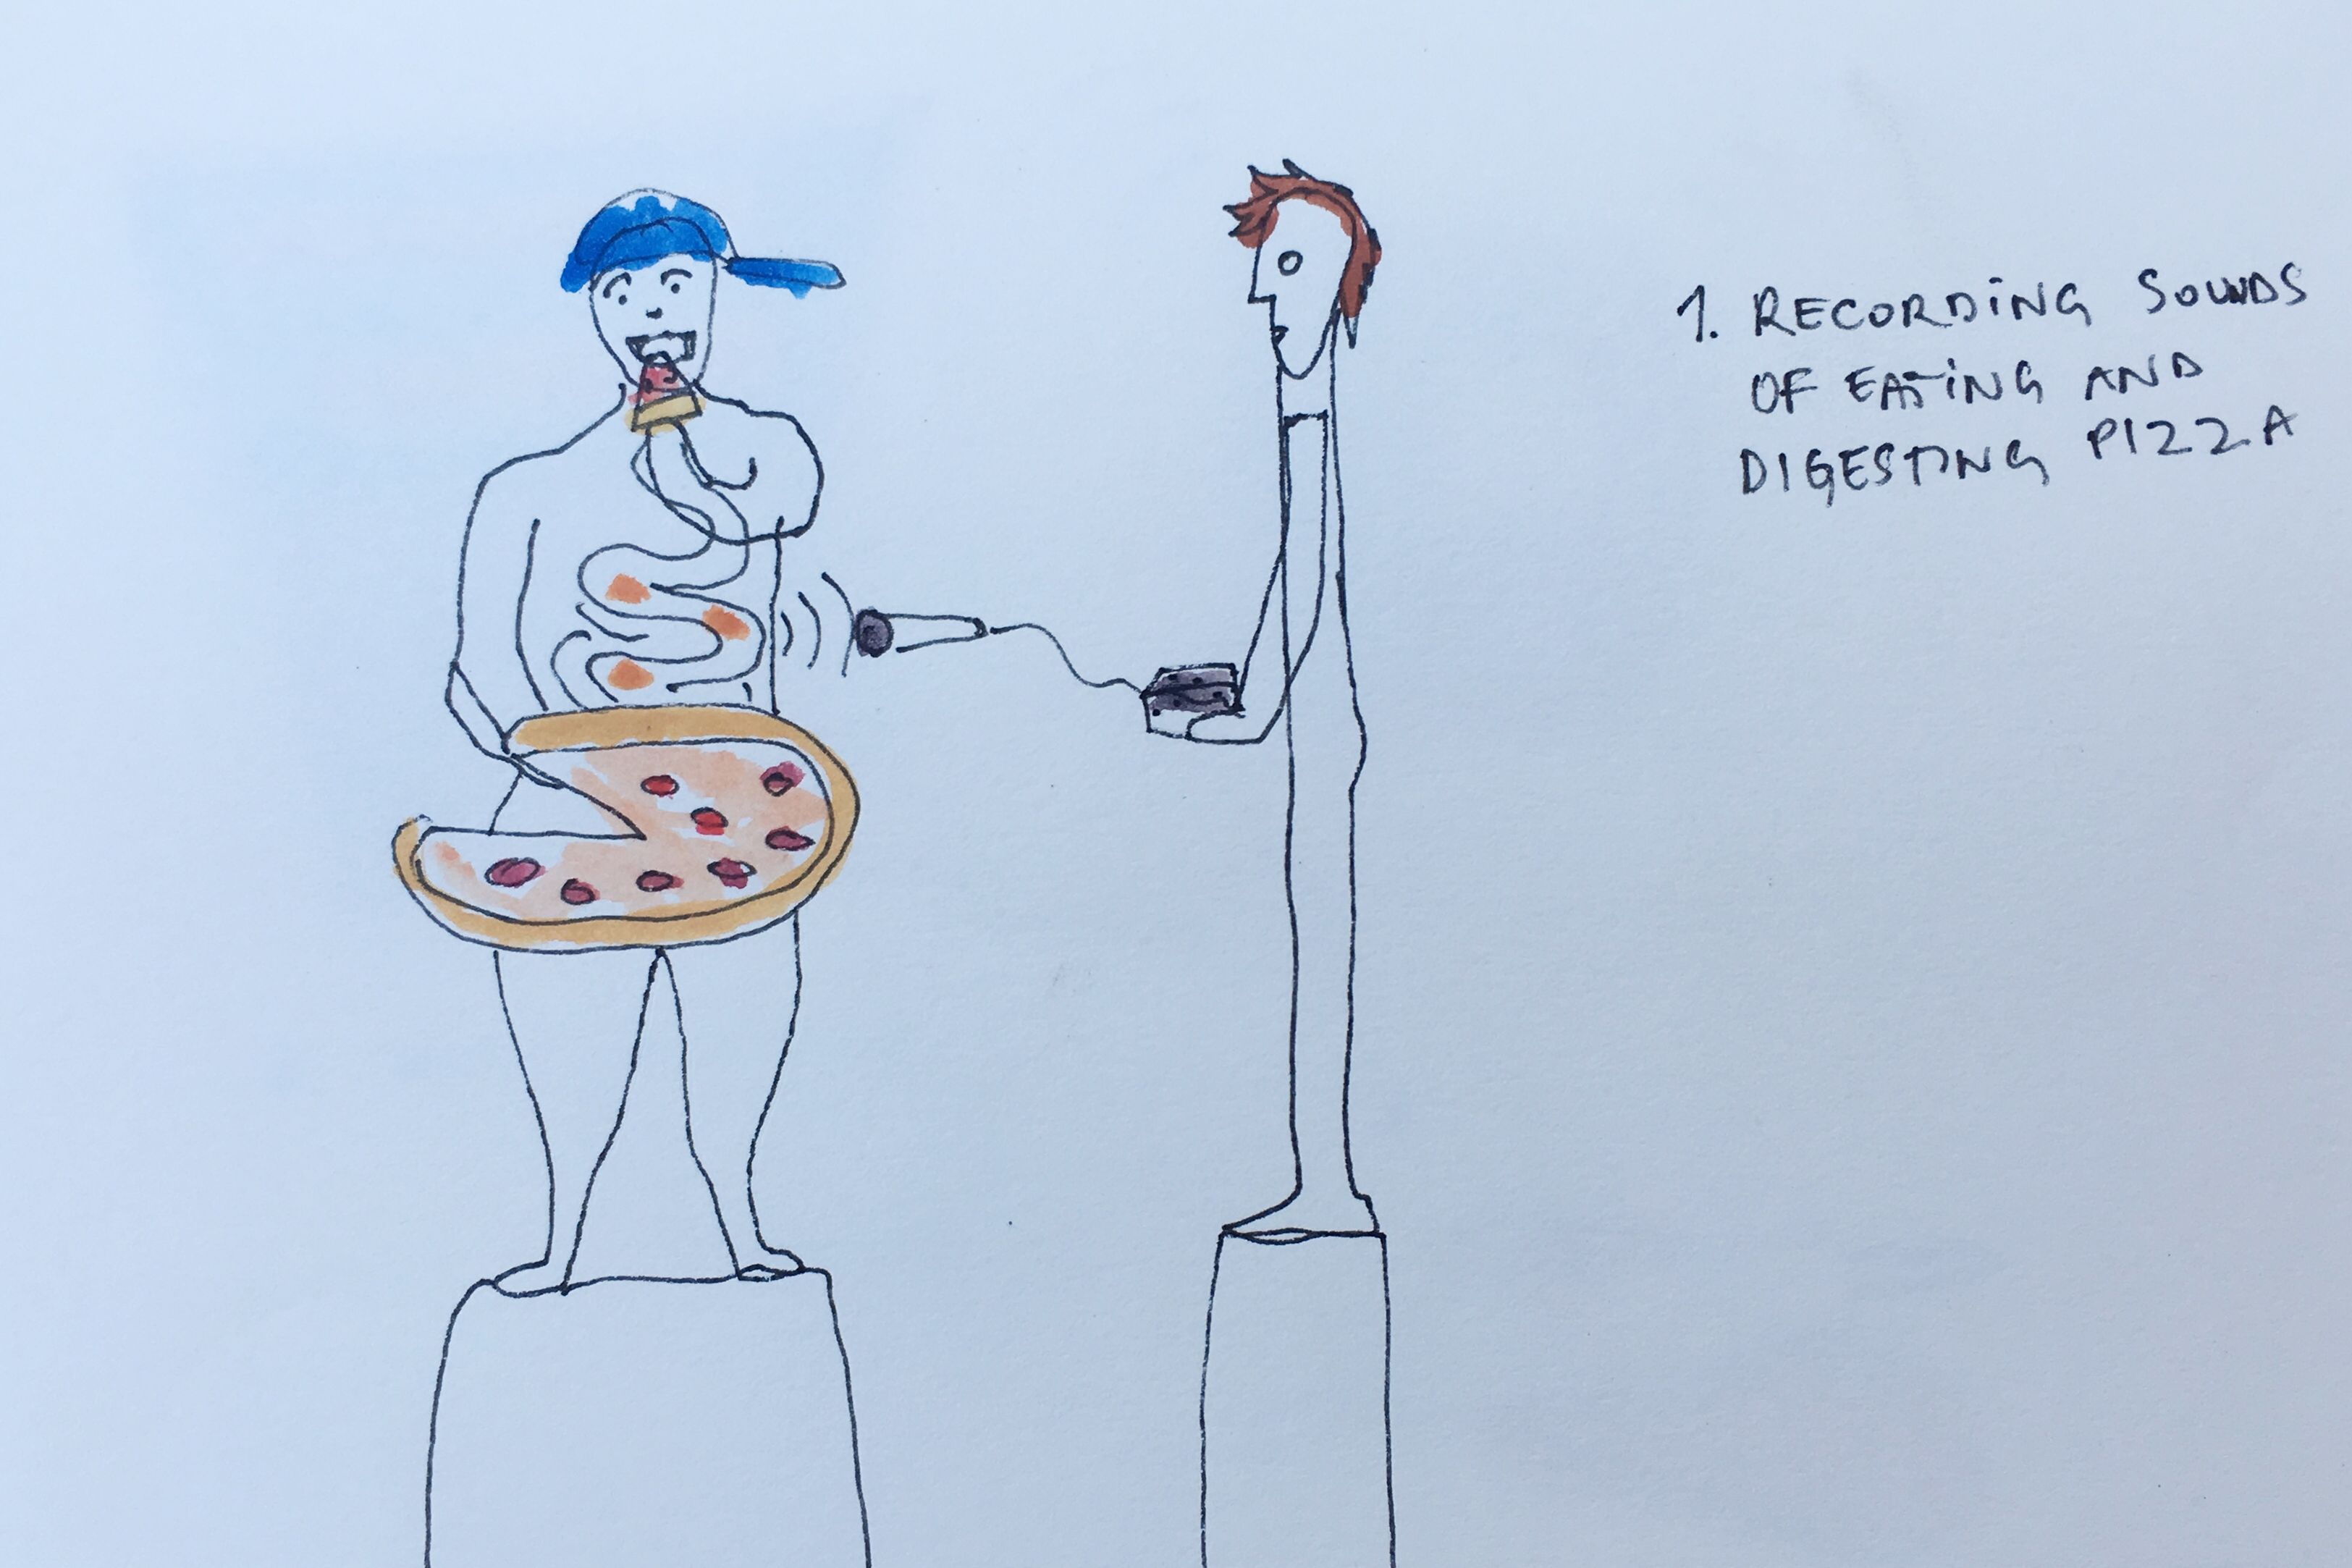 Concept color drawing showing person recording sound of person eating and digesting pizza for PPKK 05.00 by Sarah Ancelle Schoenfeld and Louis-Philippe Scoufaras